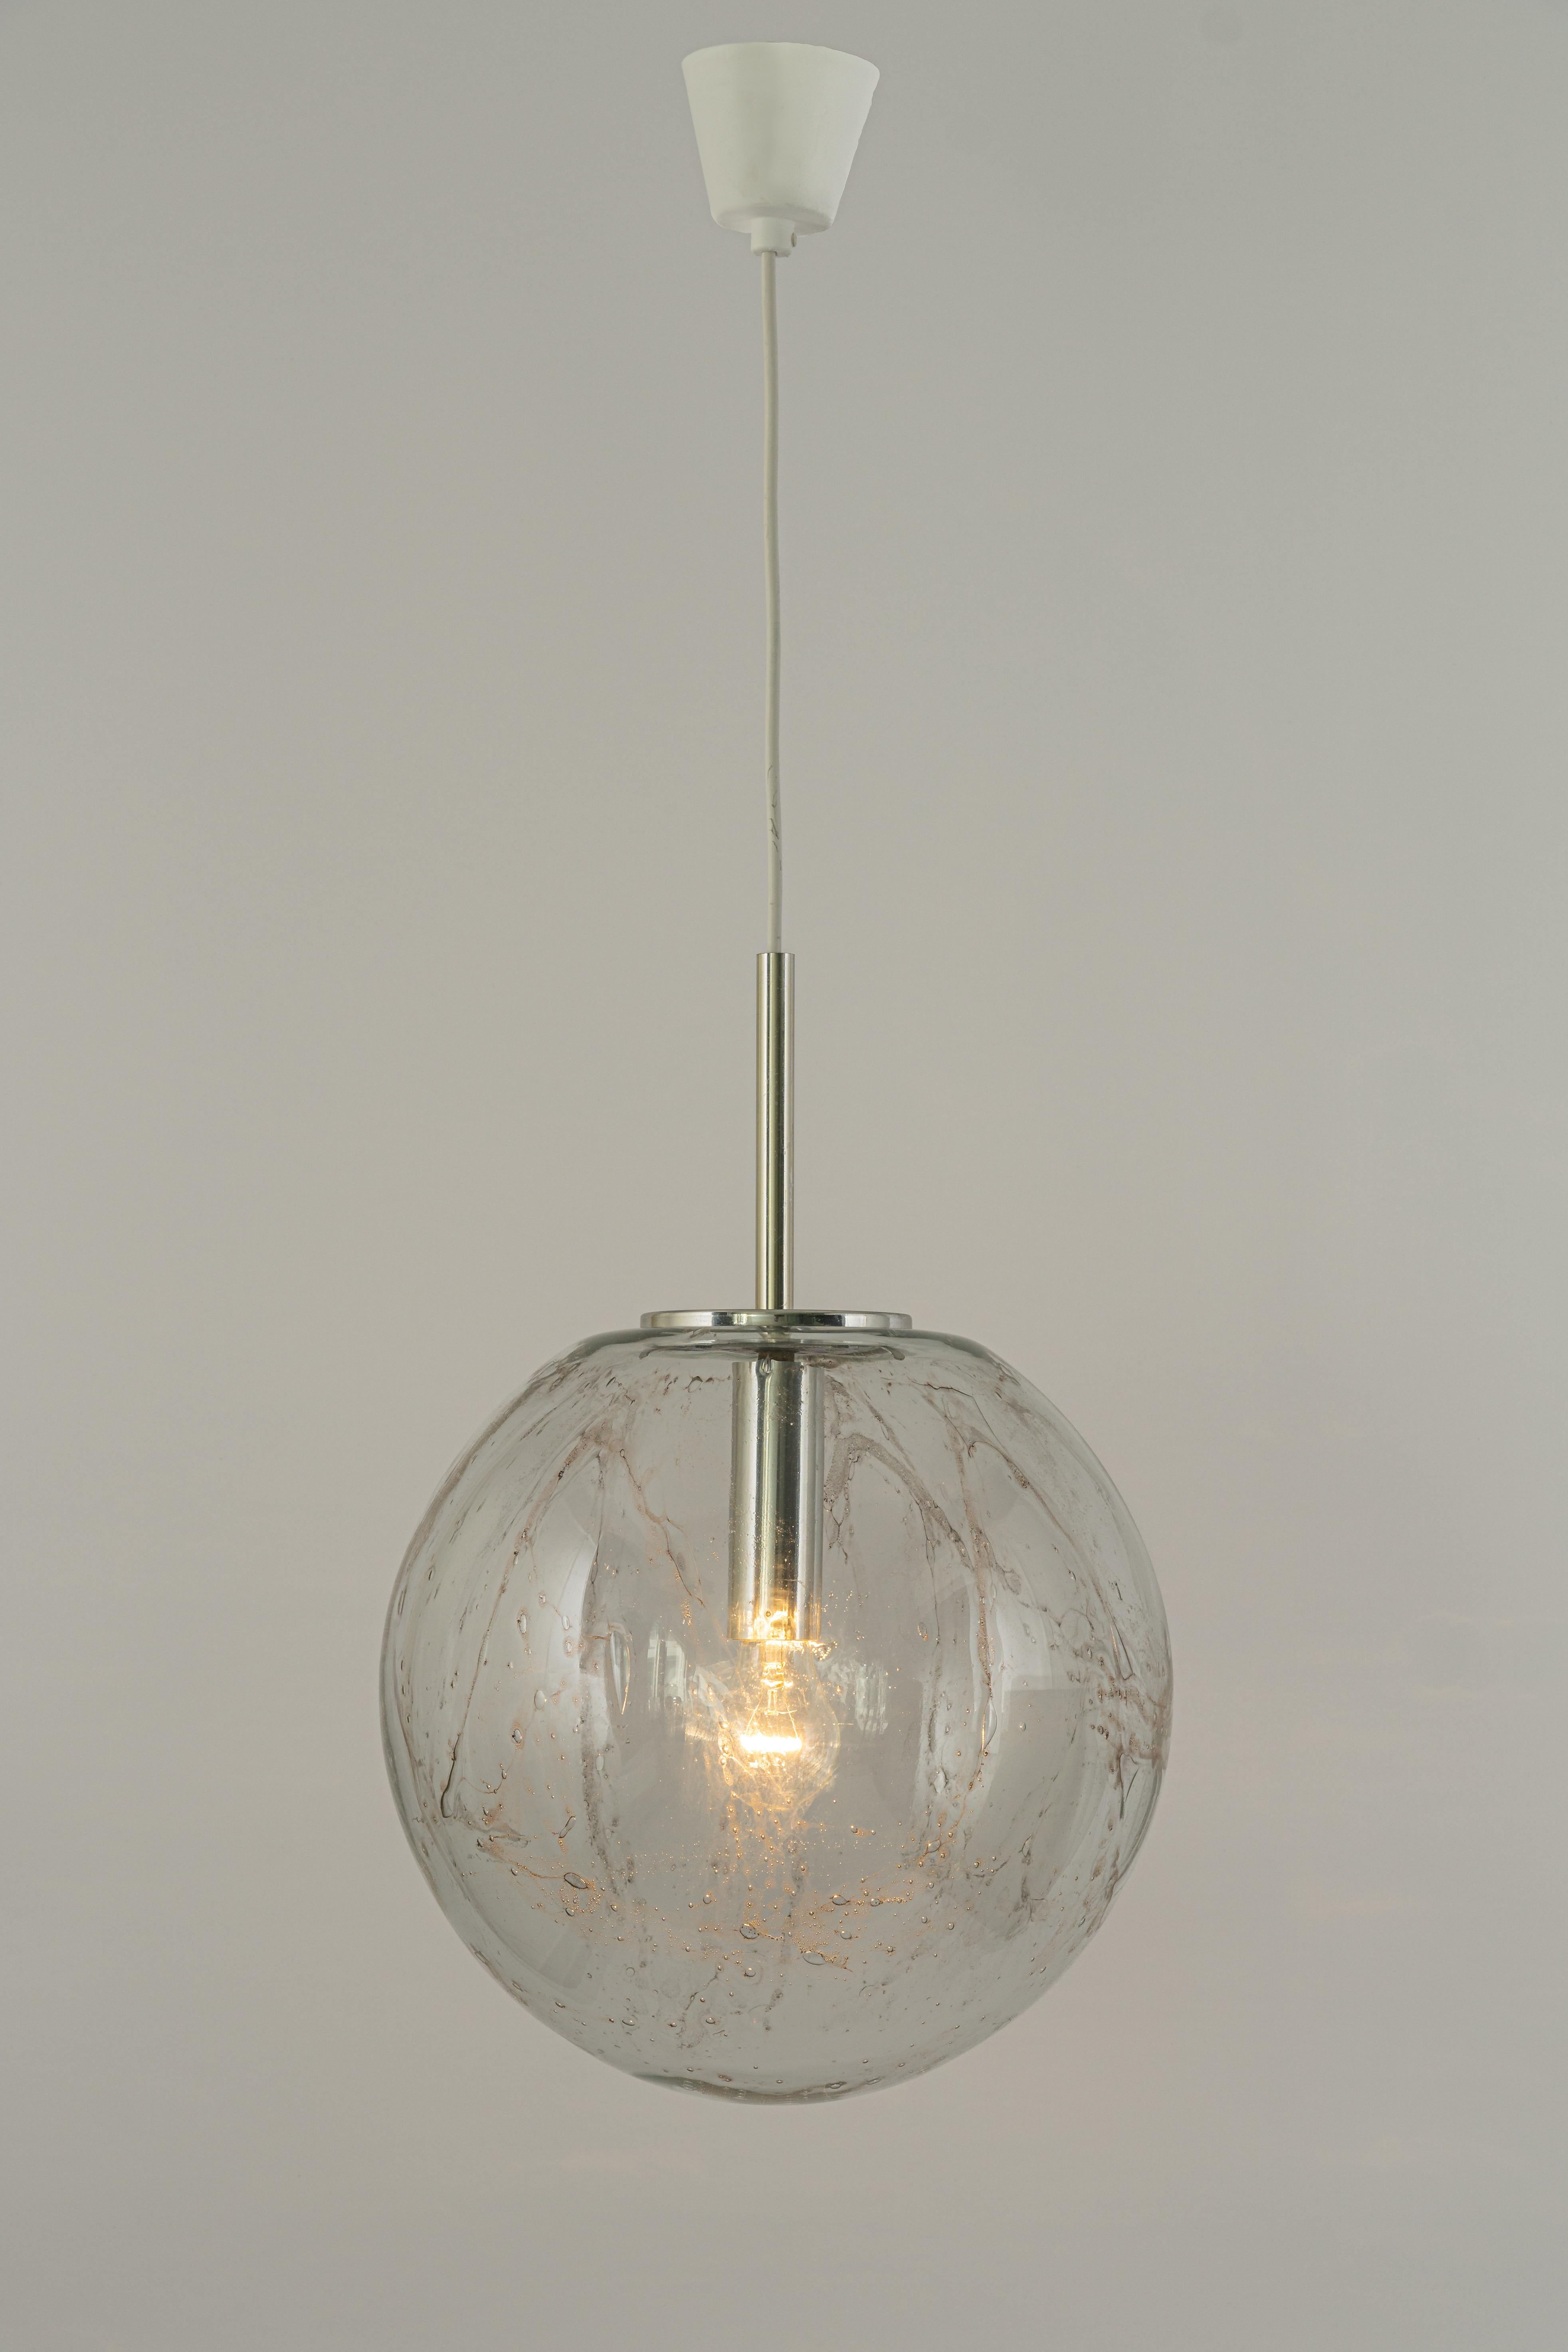 Large Murano Ball Pendant Light by Doria, Germany, 1970s For Sale 1